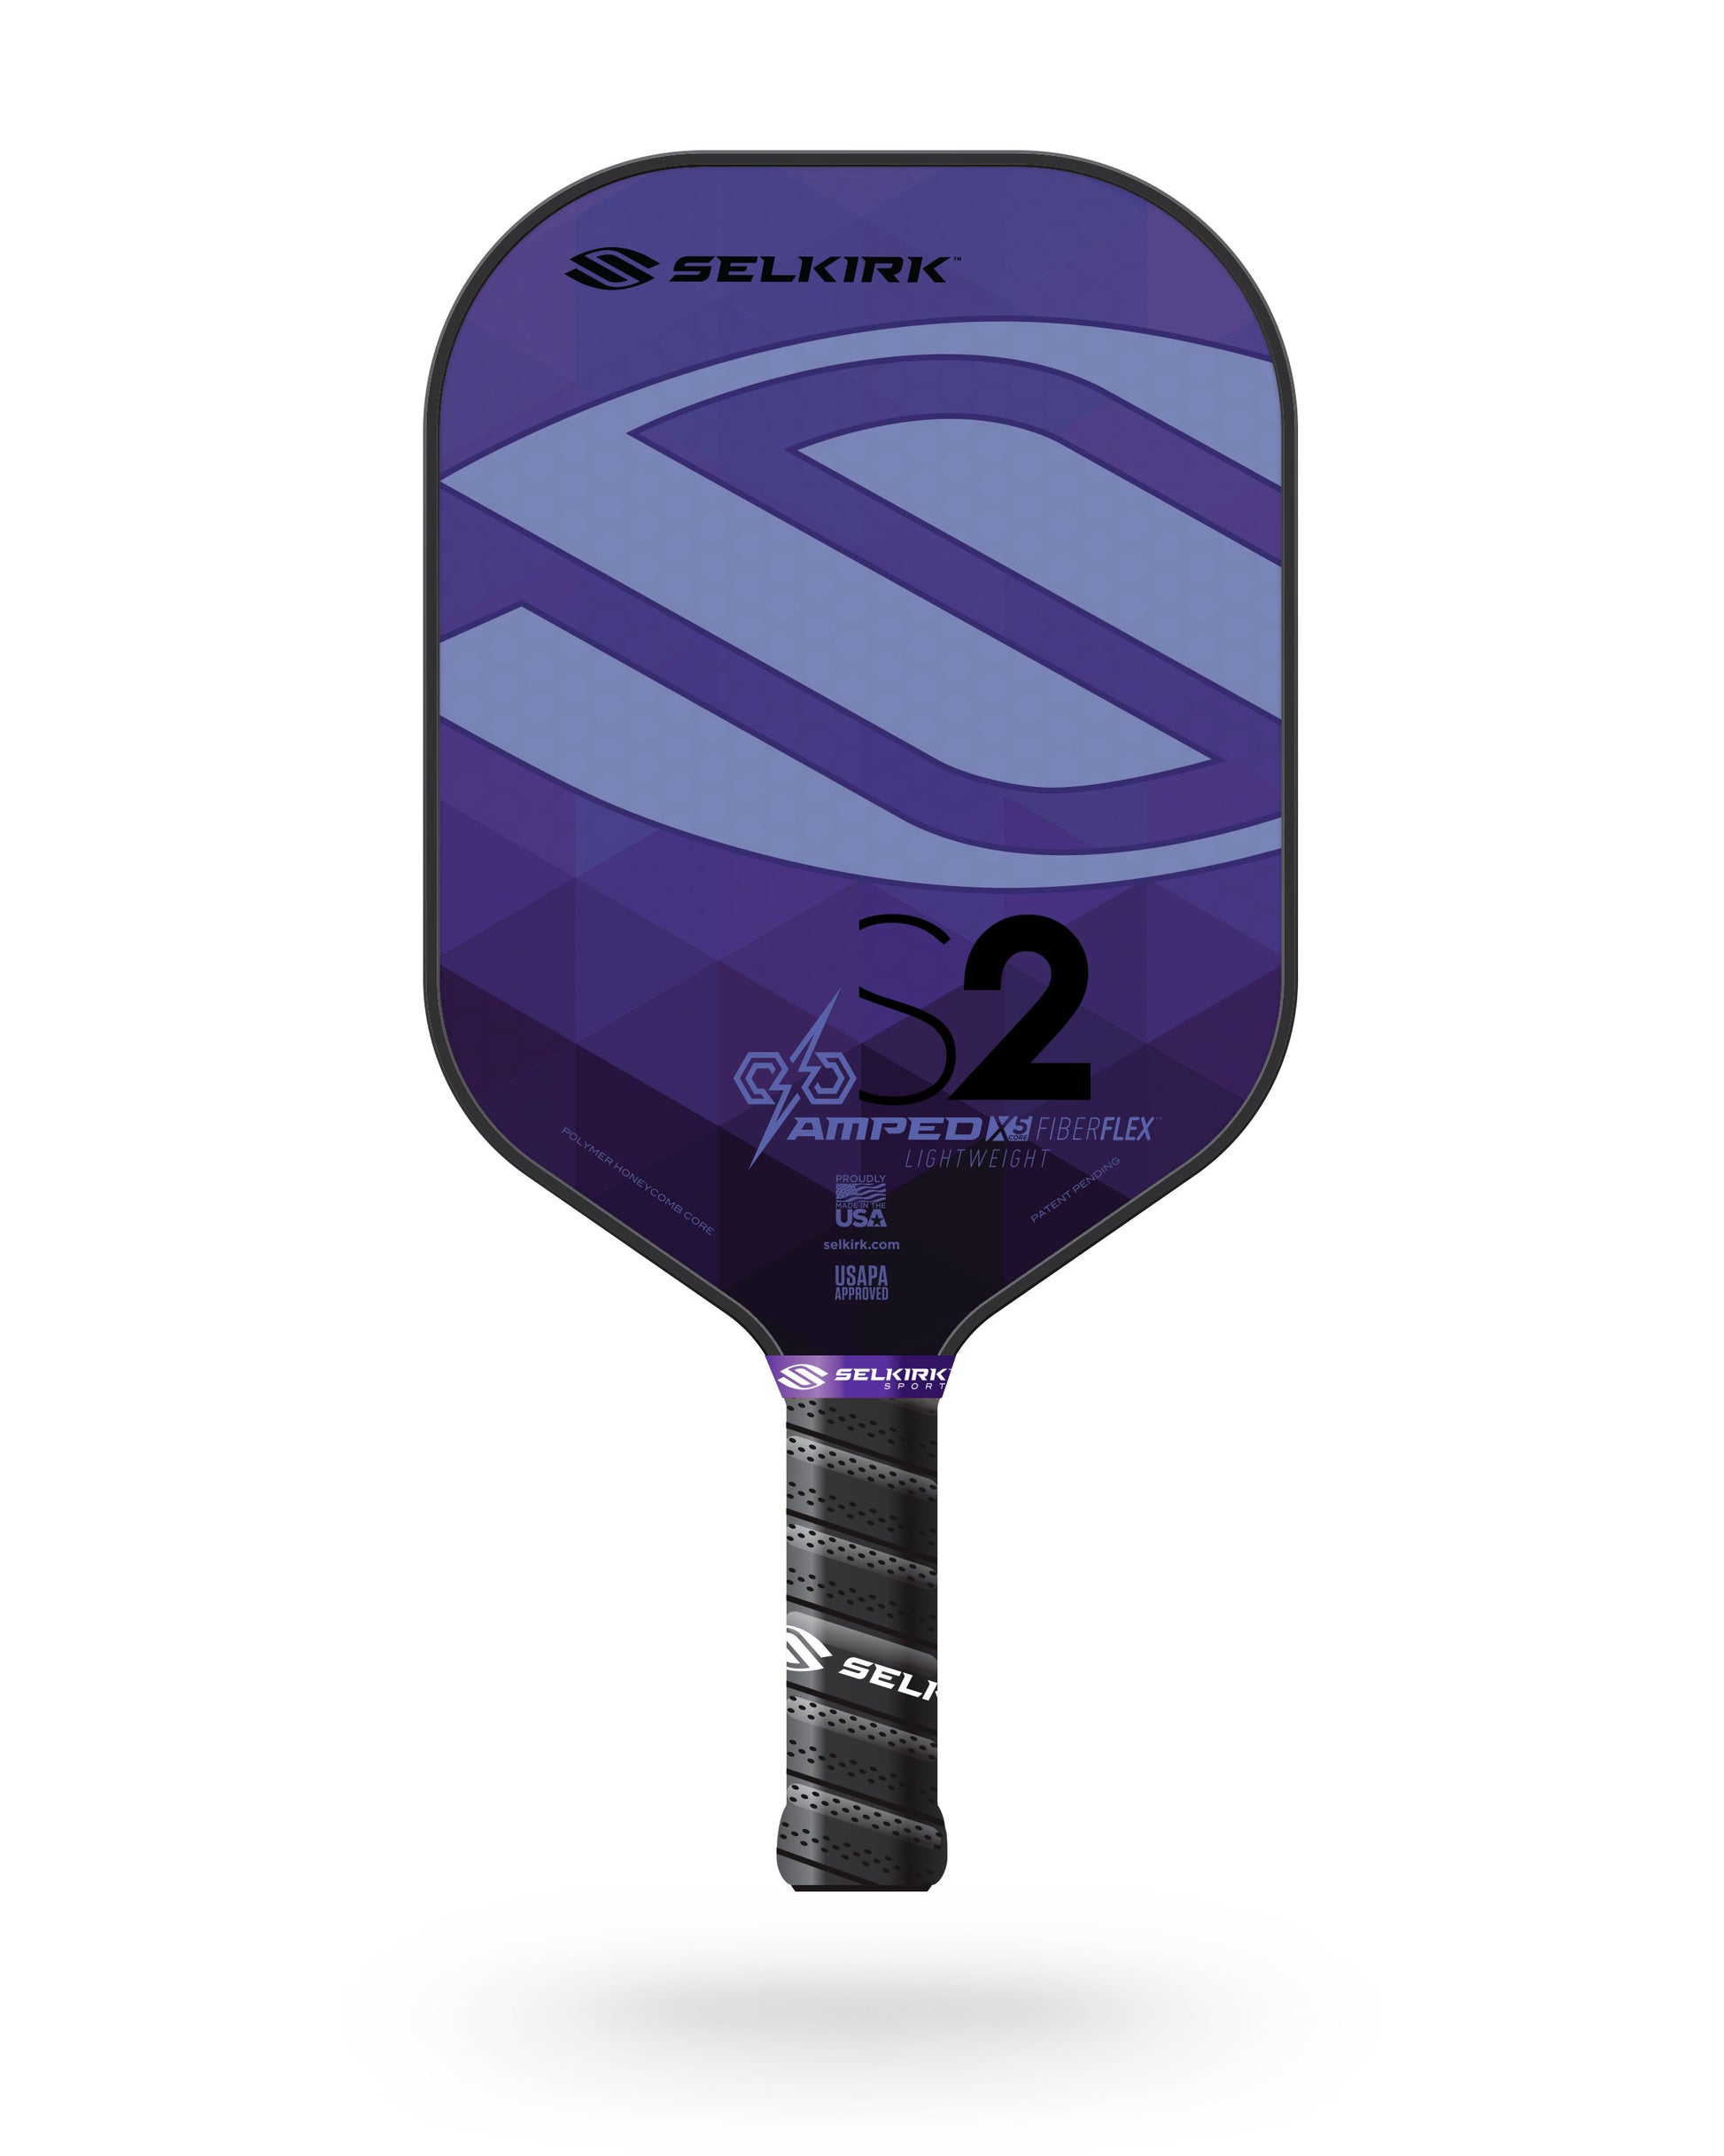 Selkirk AMPED S2 Pickleball Paddle in purple and light purple